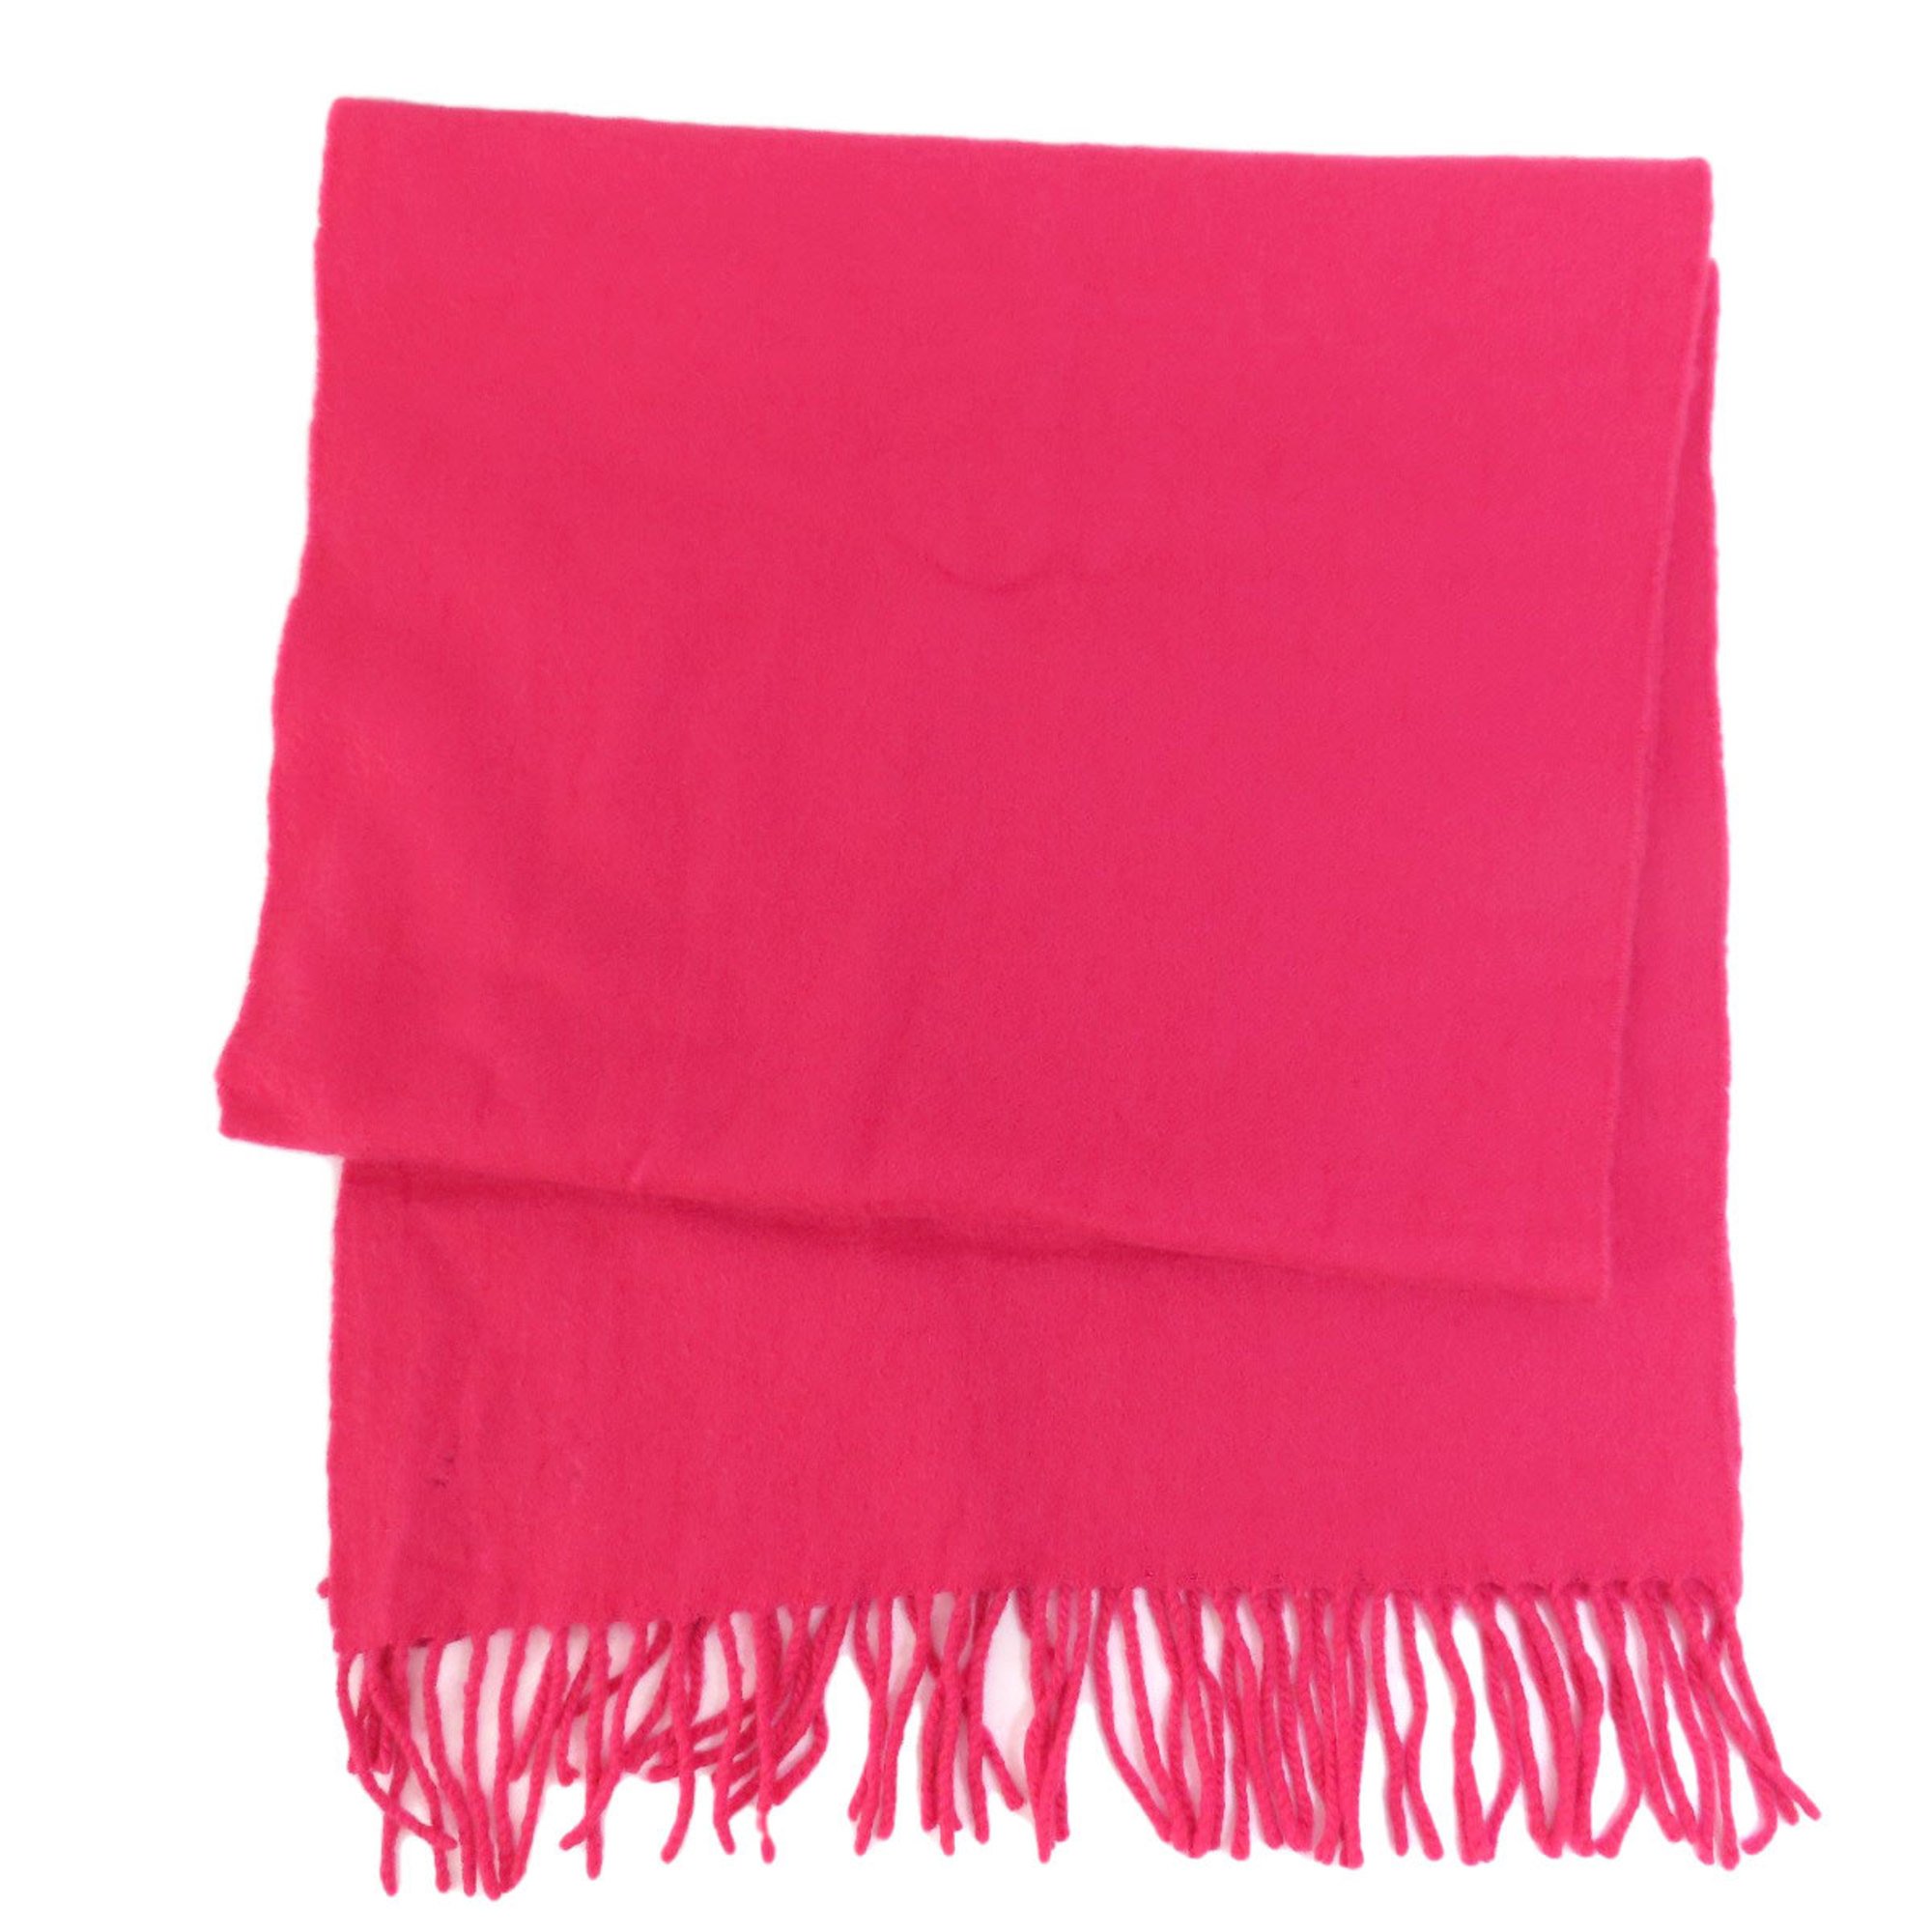 Hermes embroidered cashmere scarf for women